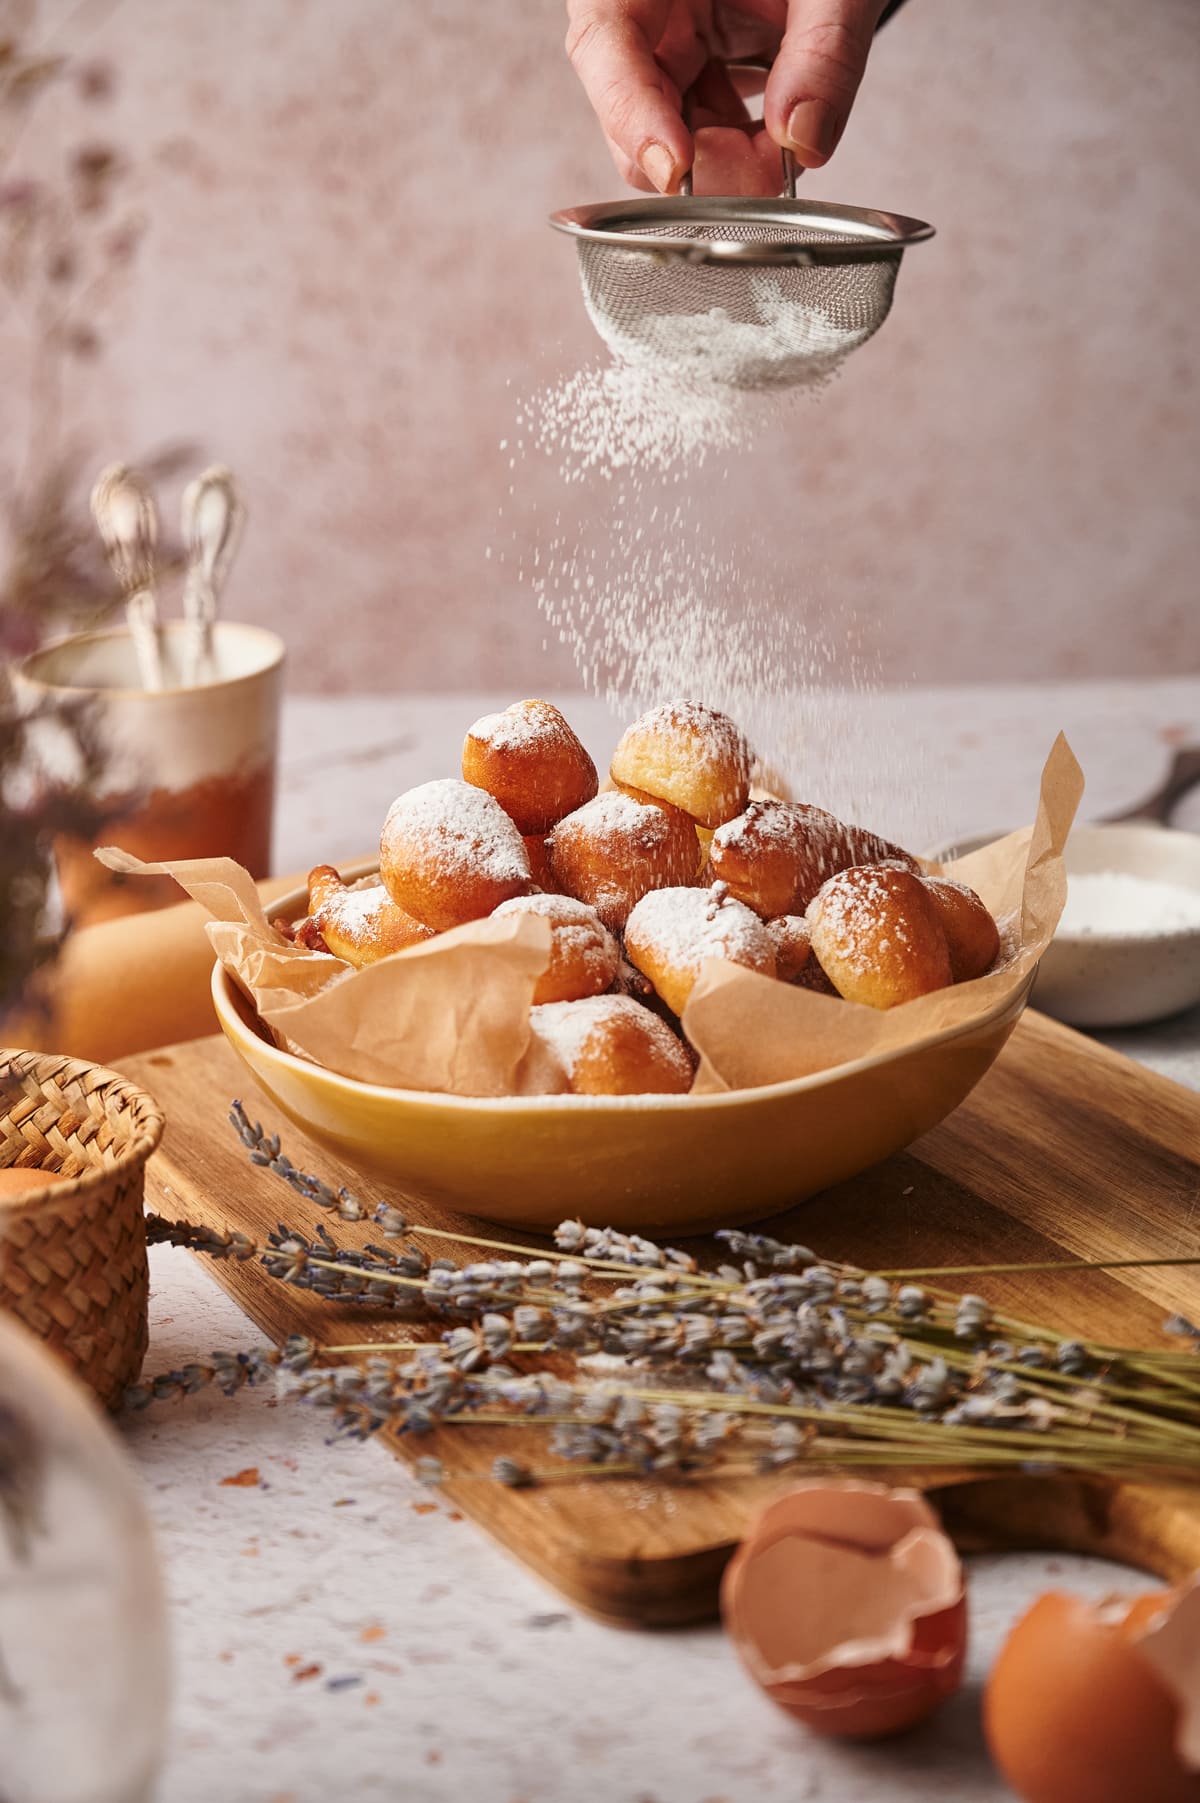 picture of zeppole on a serving bowl with an hand dusting them with powdered sugar